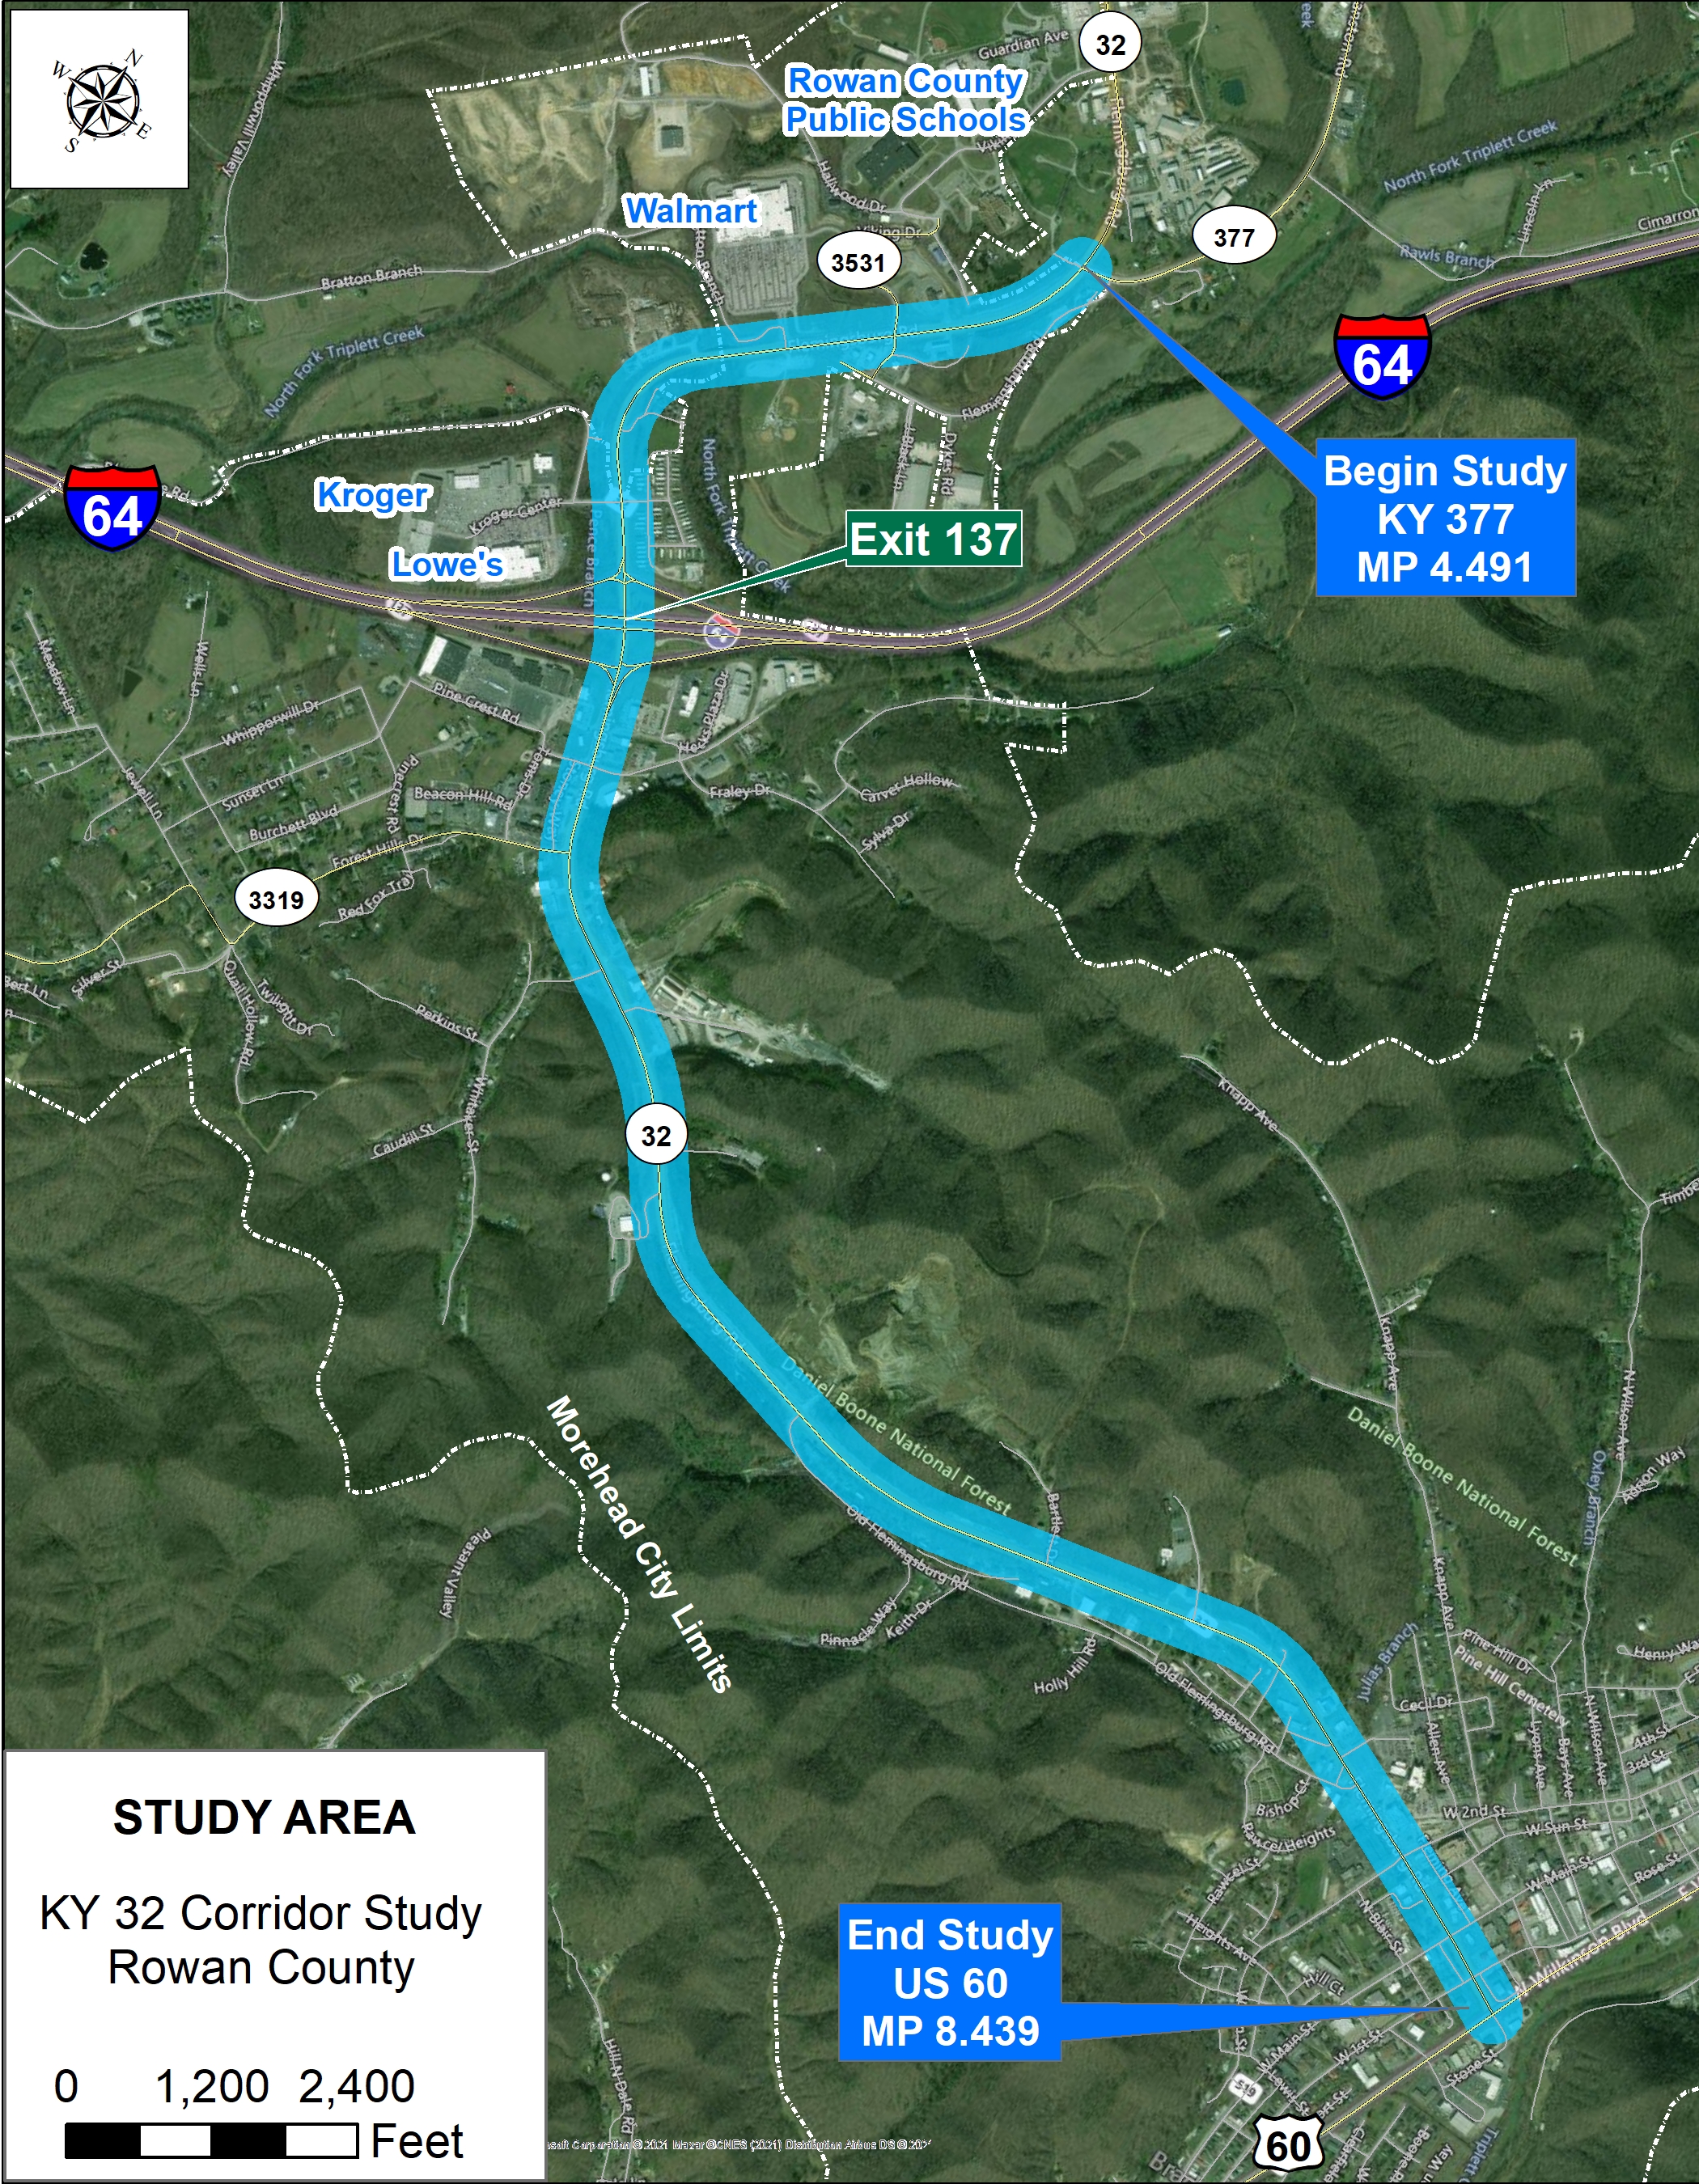 Map of KY 32 study area from KY 377 to US 60 at downtown Morehead